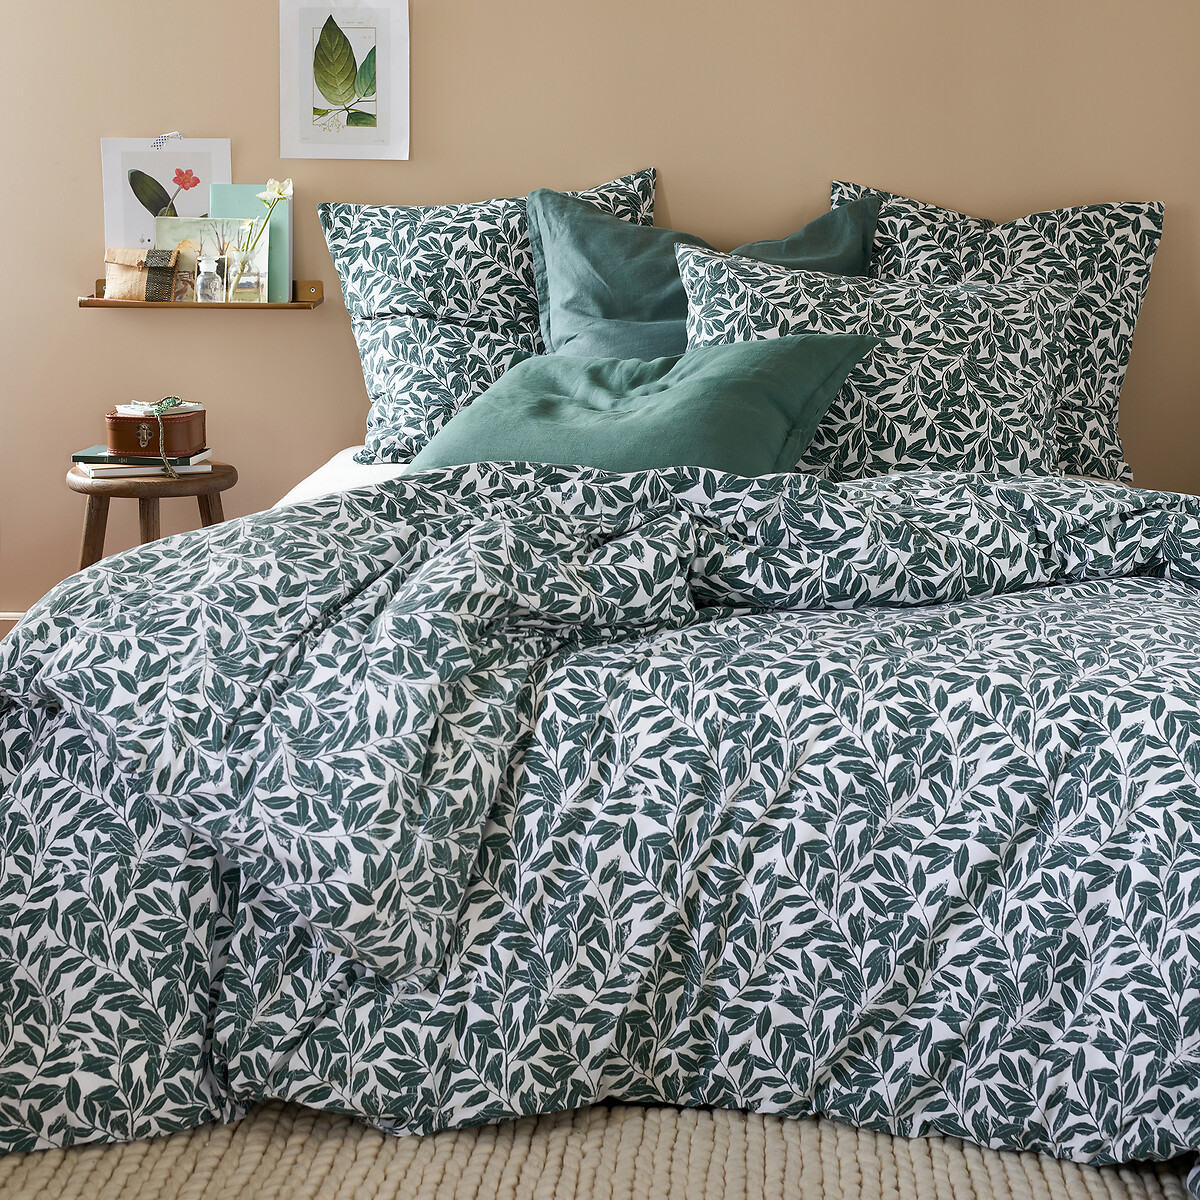 Feuillage Washed Cotton Duvet Cover, Teal Washed Cotton Duvet Cover